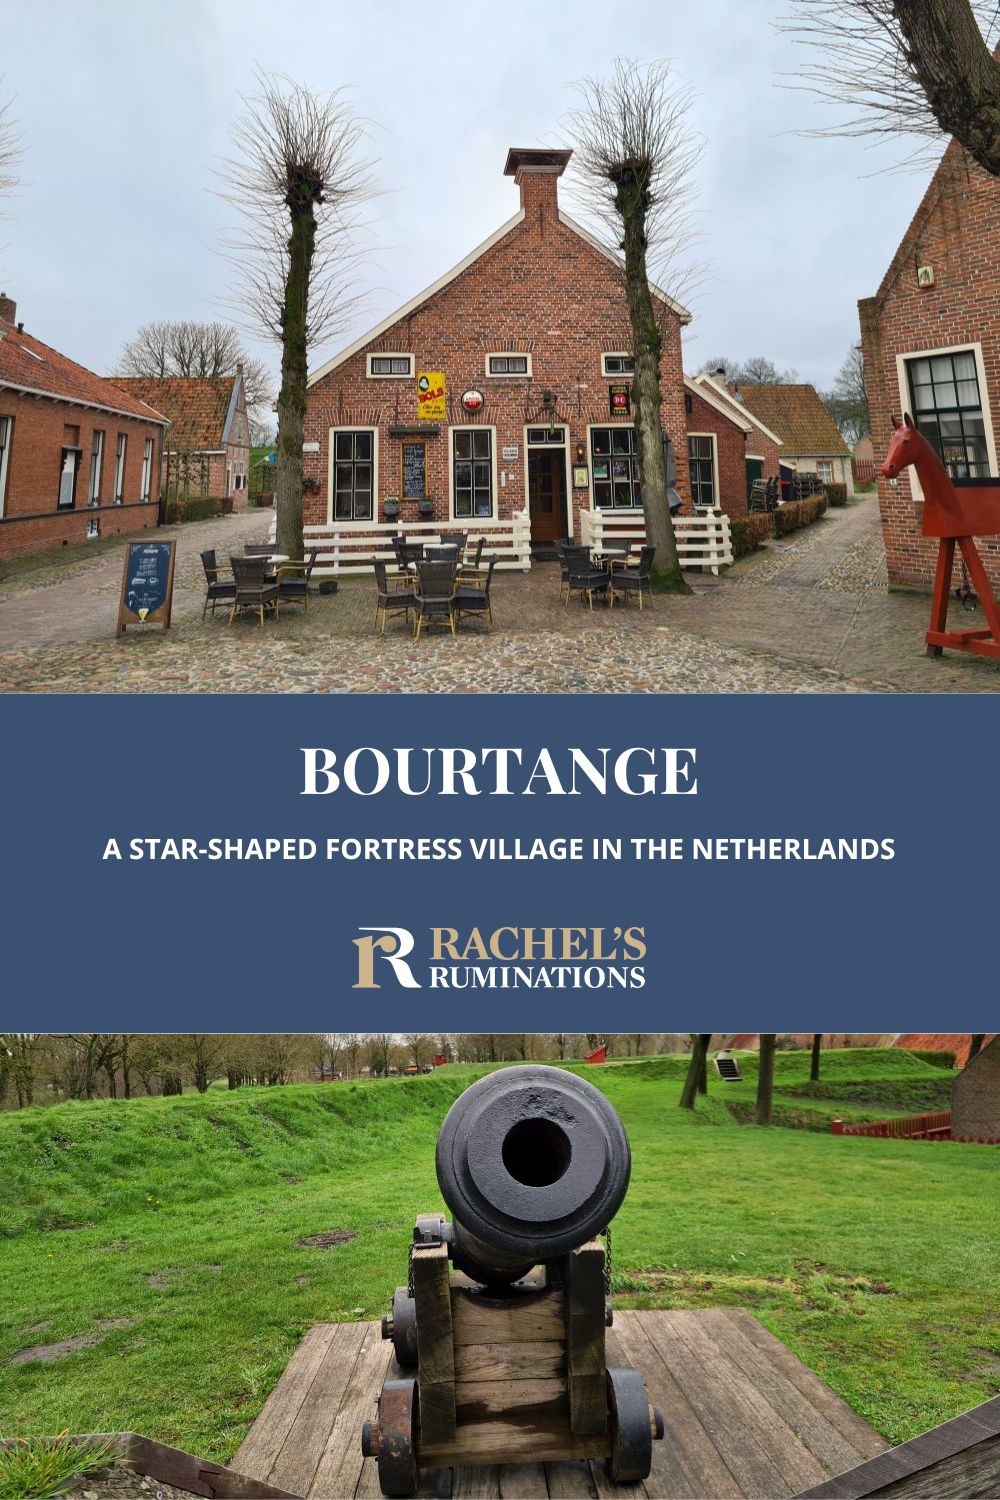 If you visit the east of the Netherlands, do not miss Bourtange, a charming village inside a star-shaped fortress. via @rachelsruminations